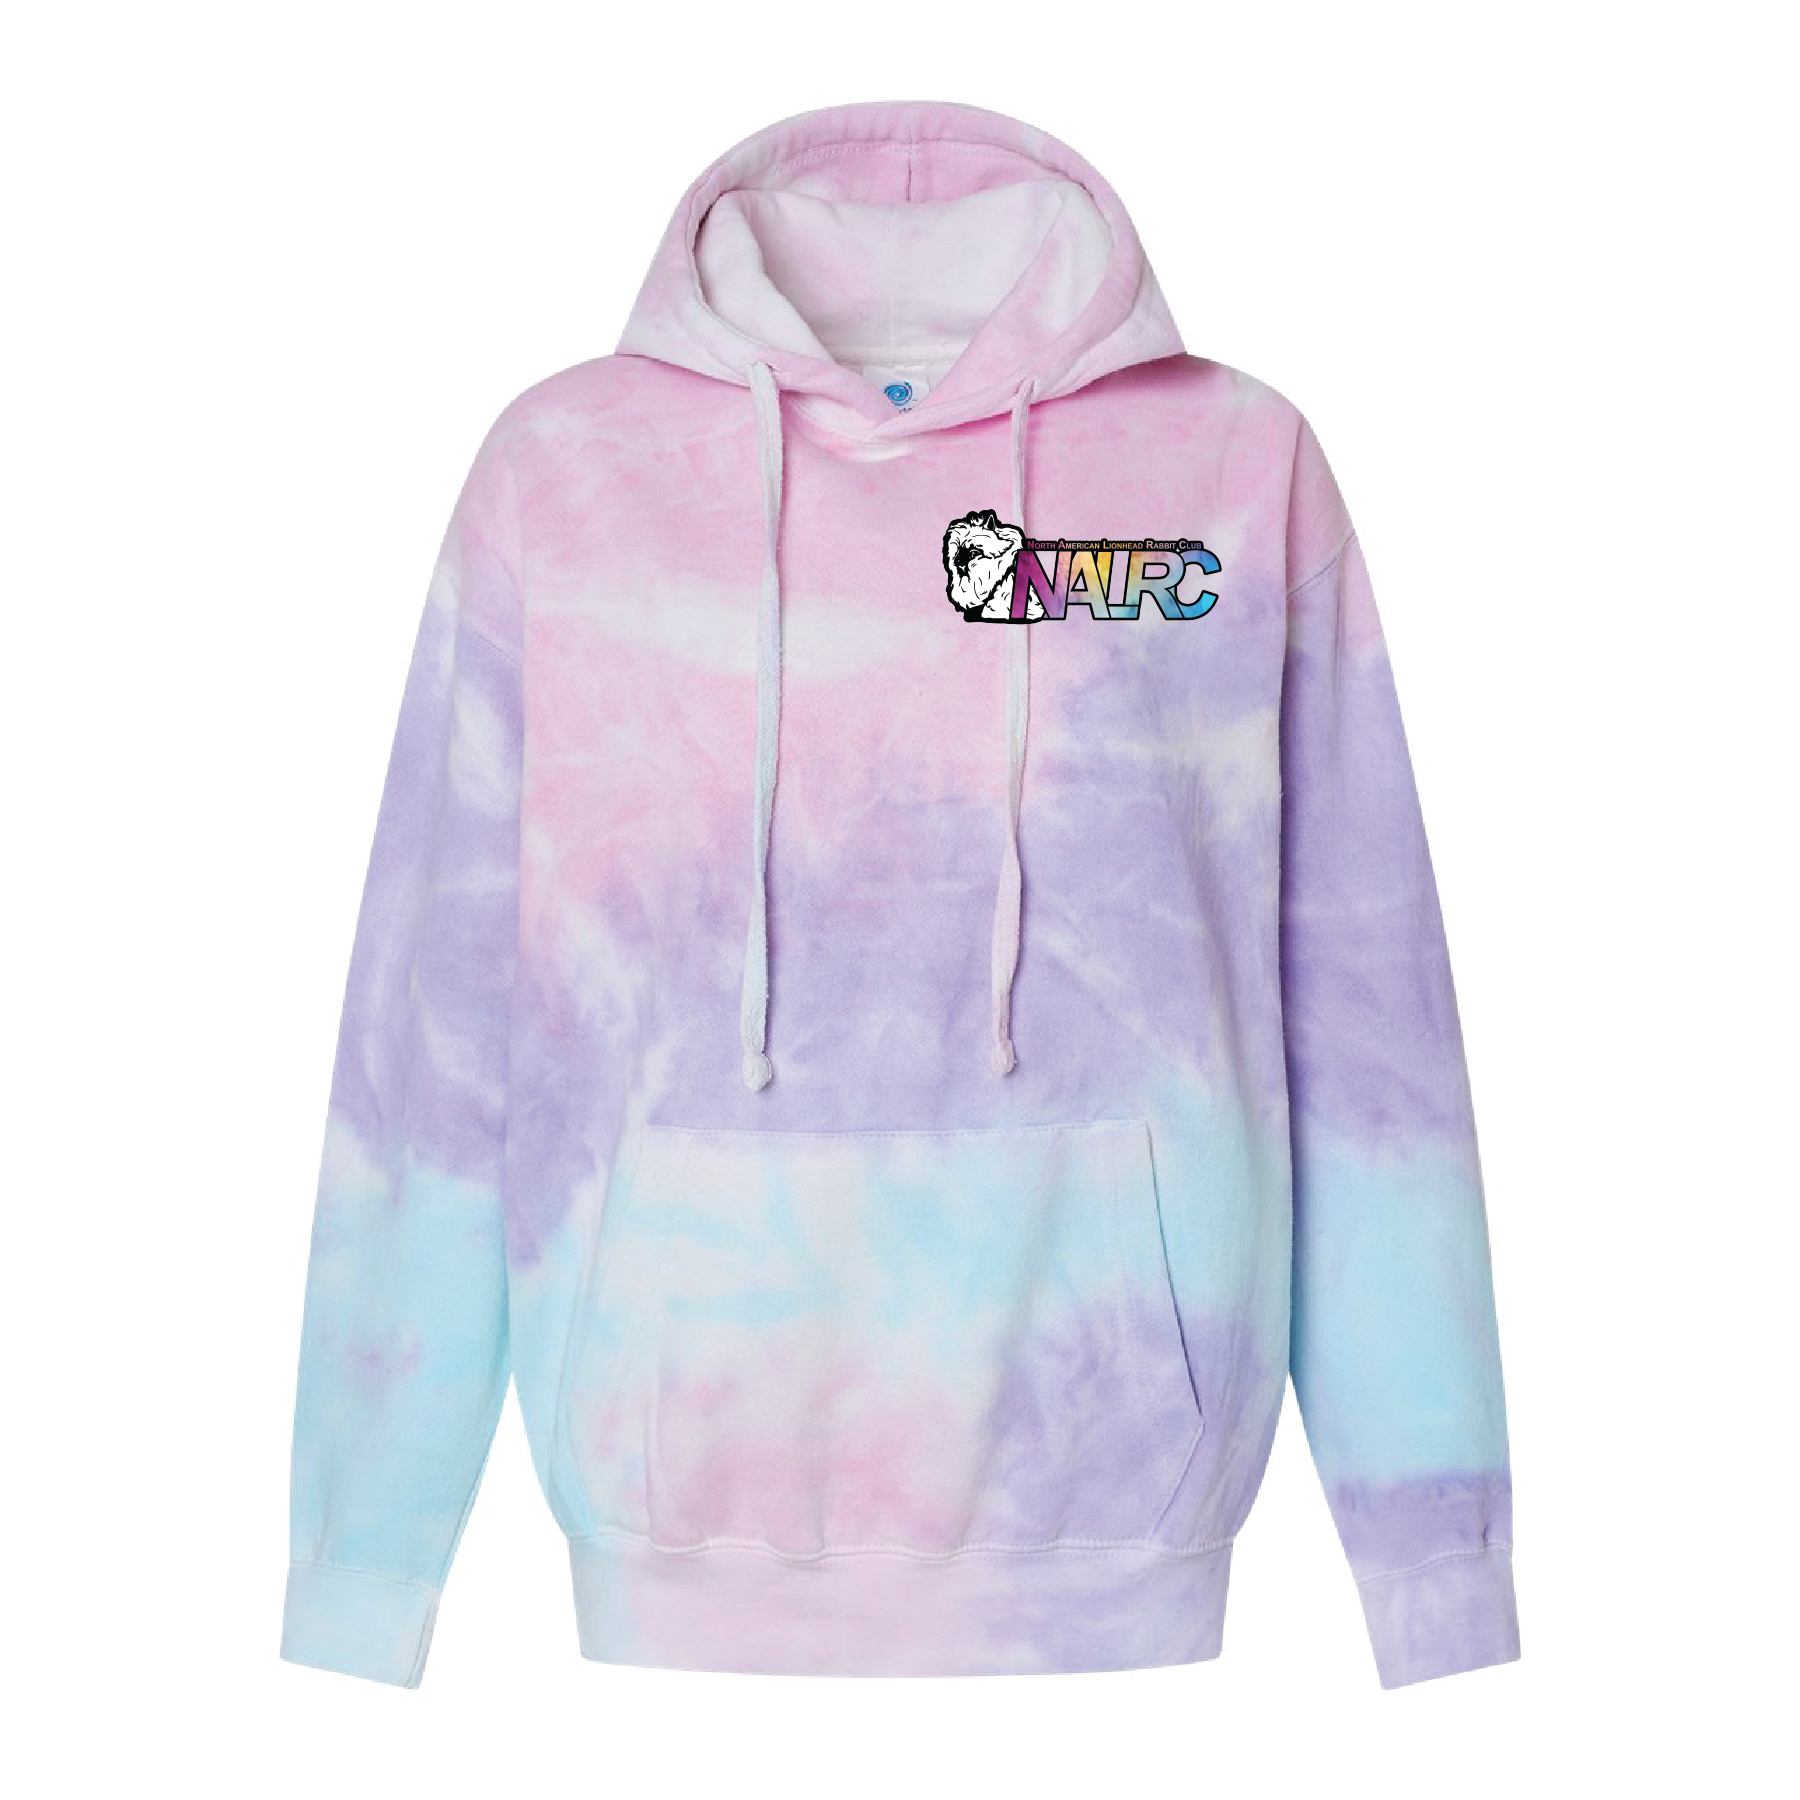 NALRC Logo Hoodie – Cotton Candy Tie-Dyed Hoodie - PM Graphix